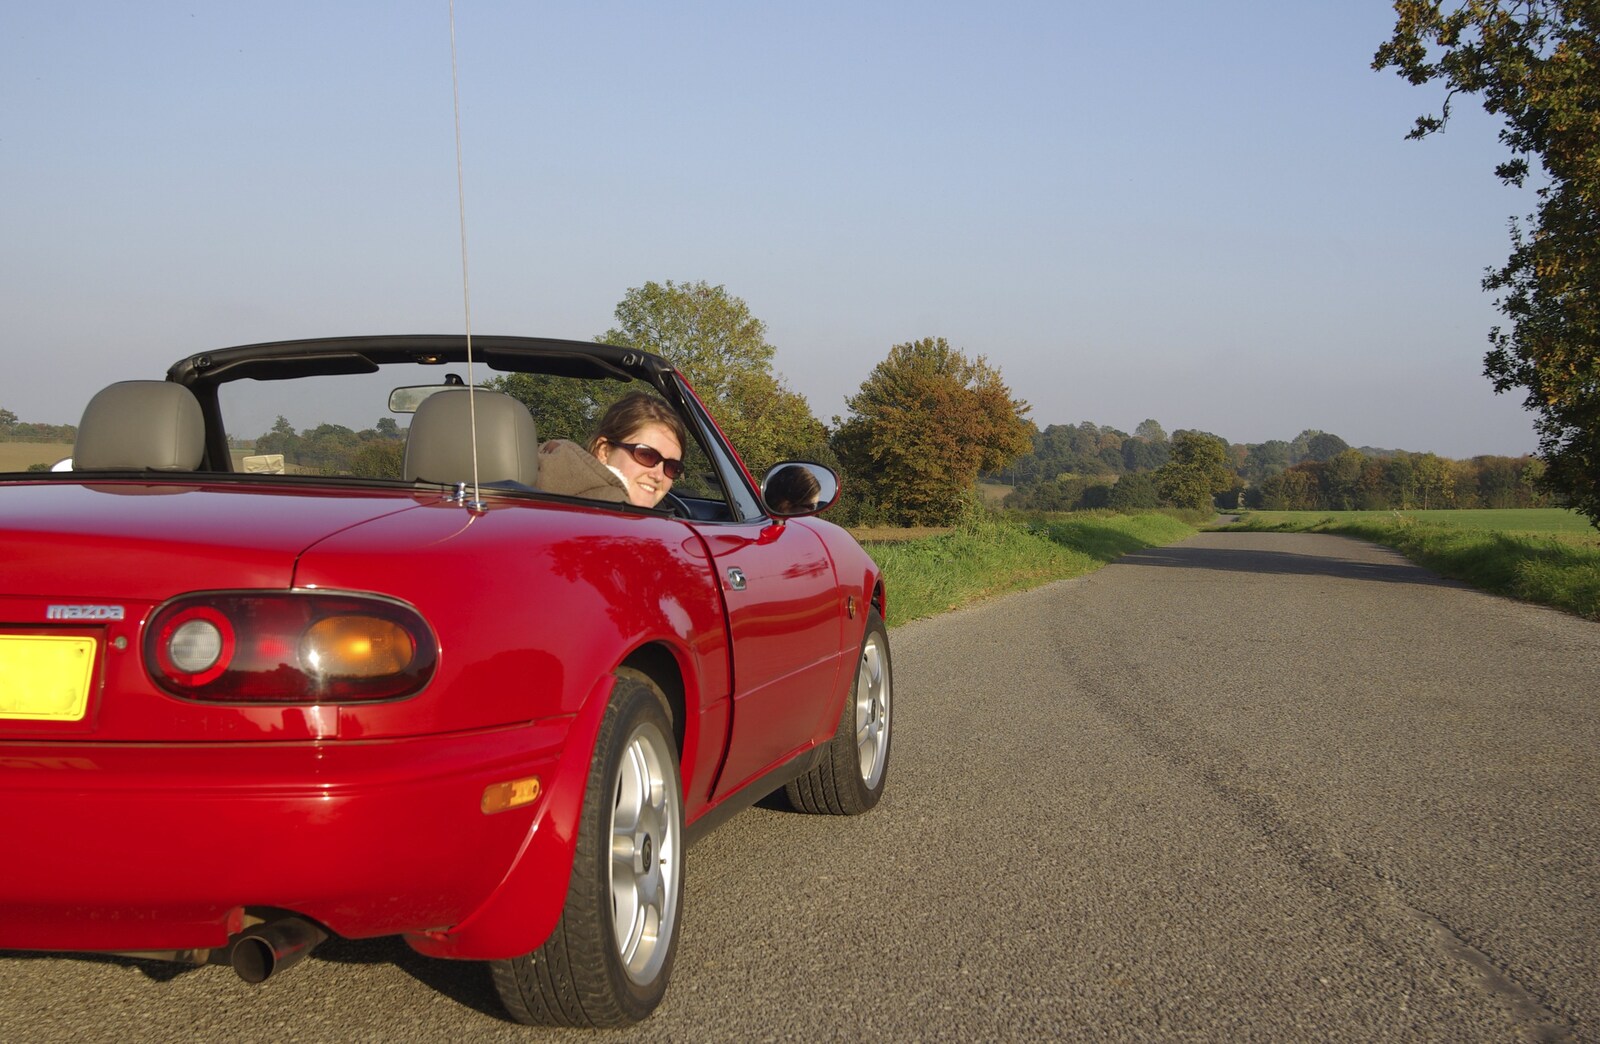 A Road Trip in an MX-5, and Athlete at the UEA, Lavenham and Norwich - 14th October 2007: Isobel looks ready to speed off